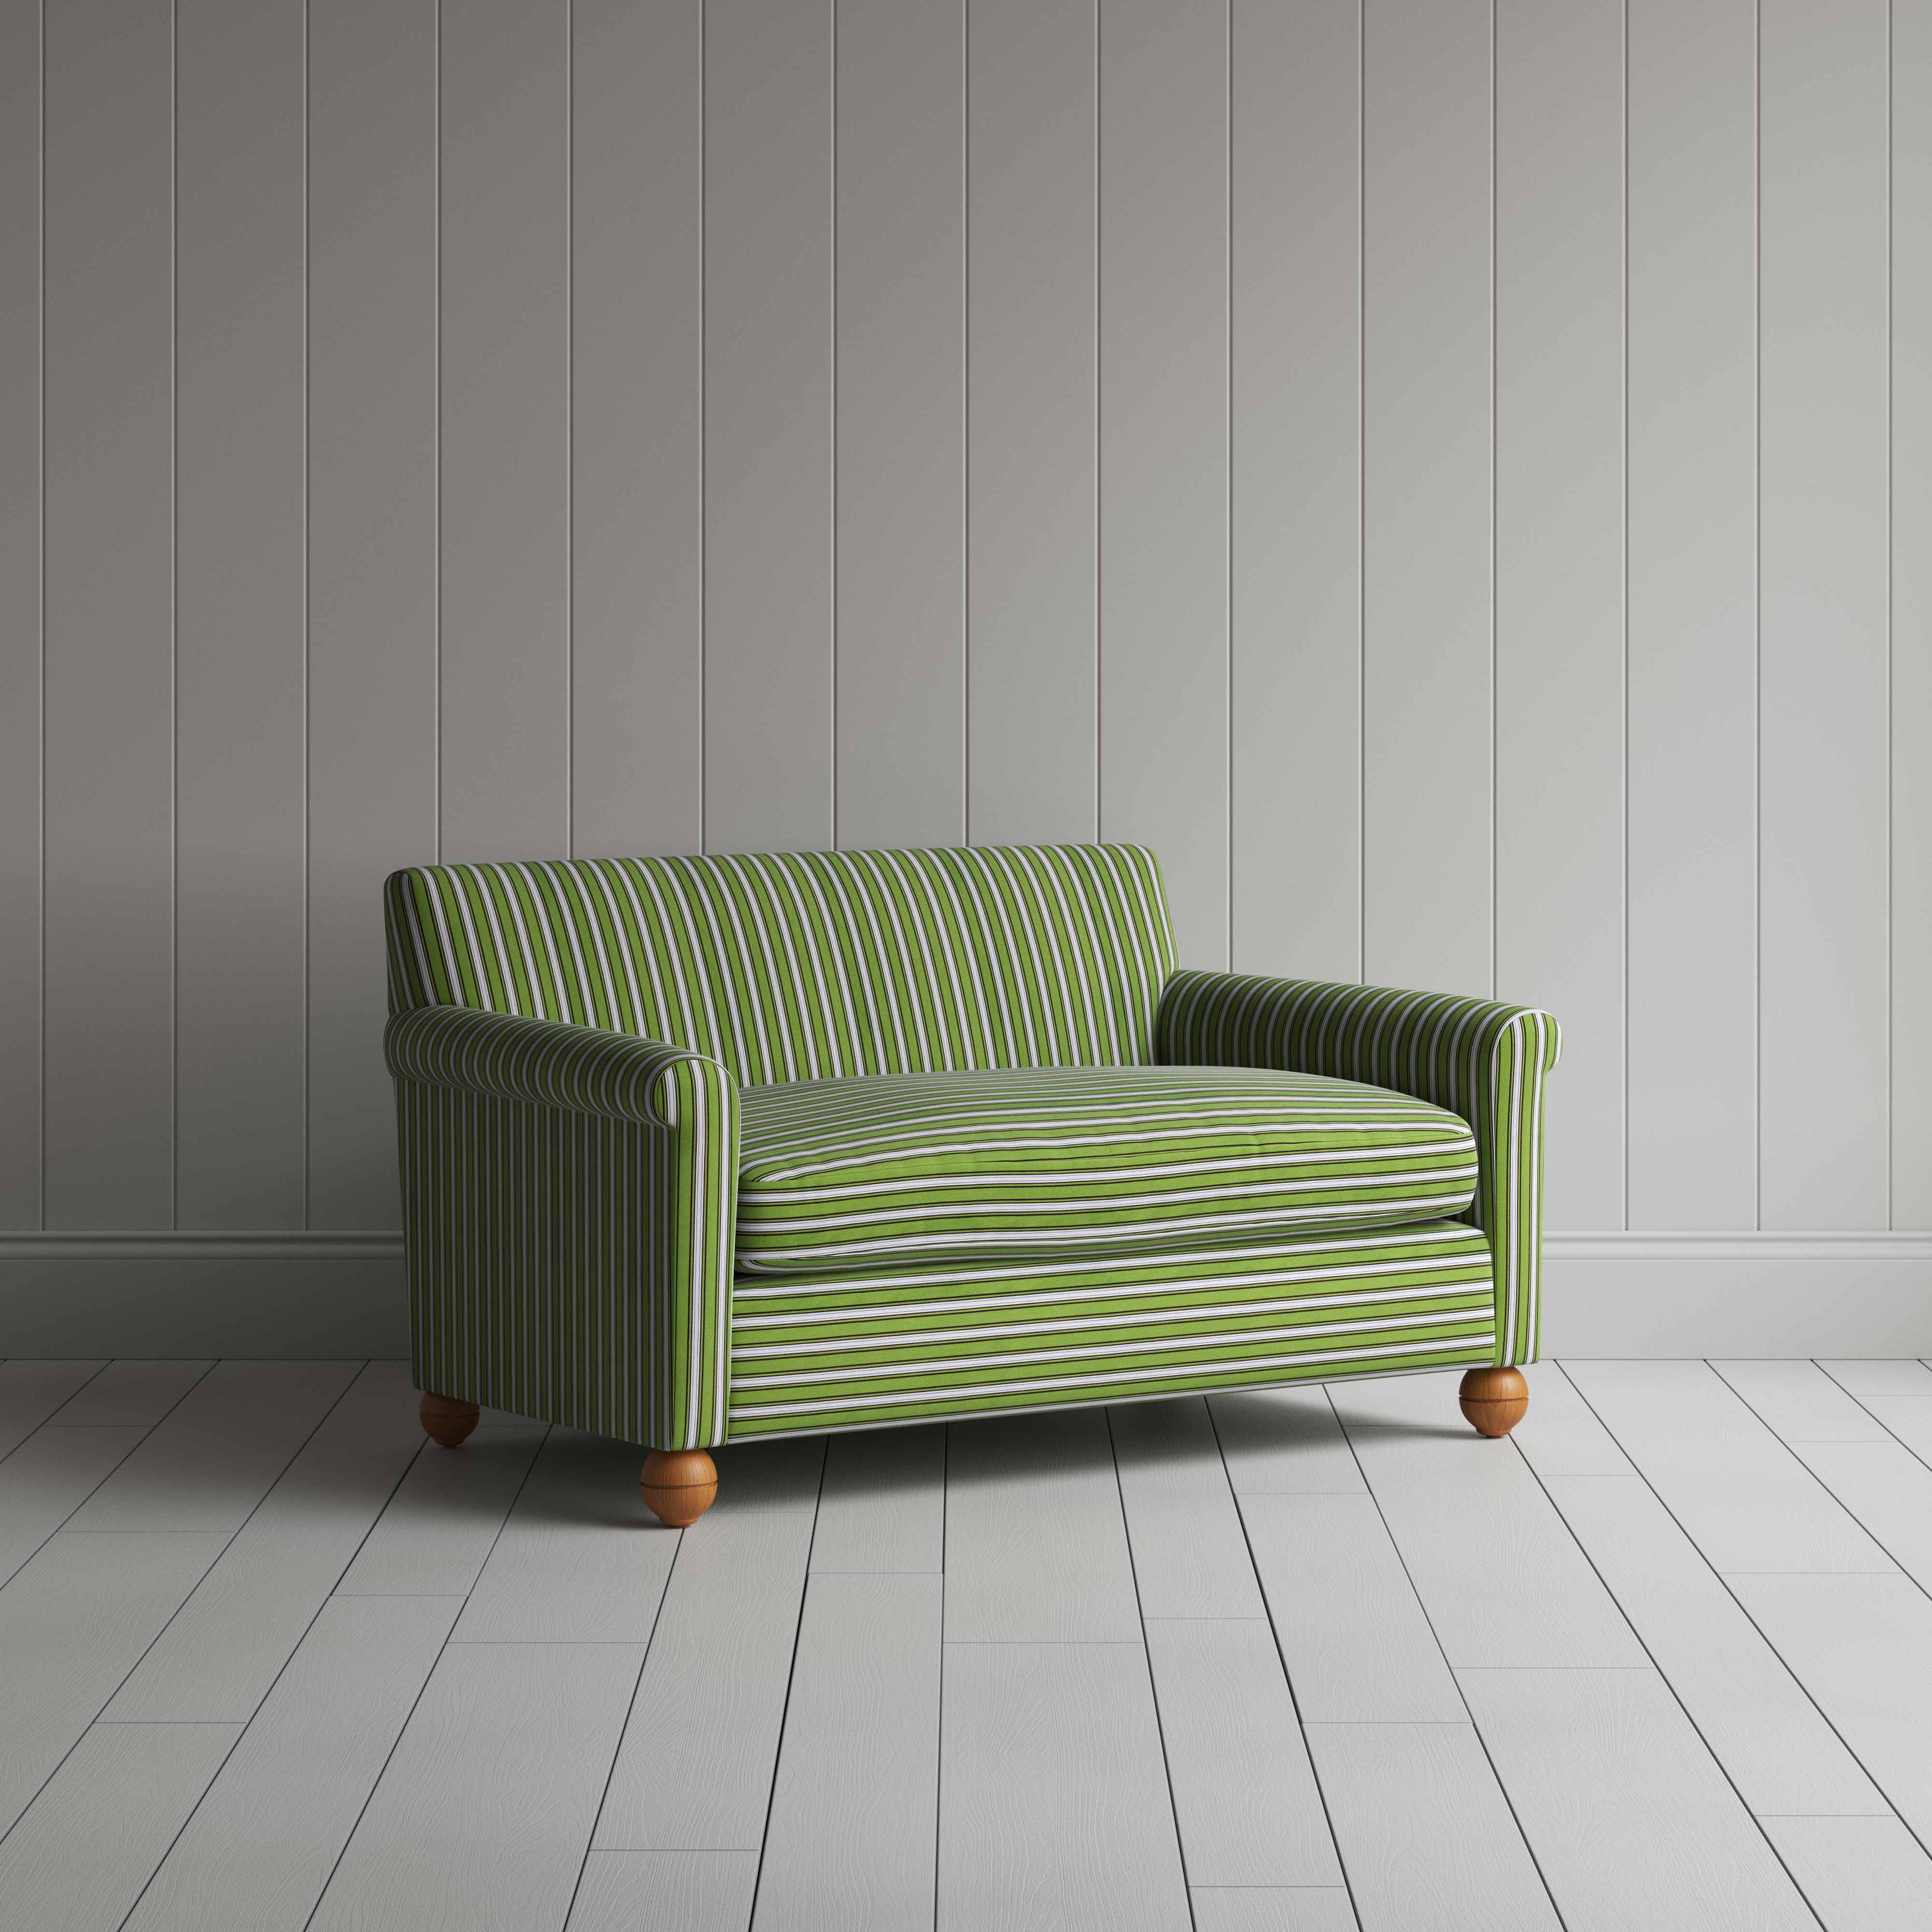  Idler 2 Seater Sofa in Colonnade Cotton, Green and Wine 